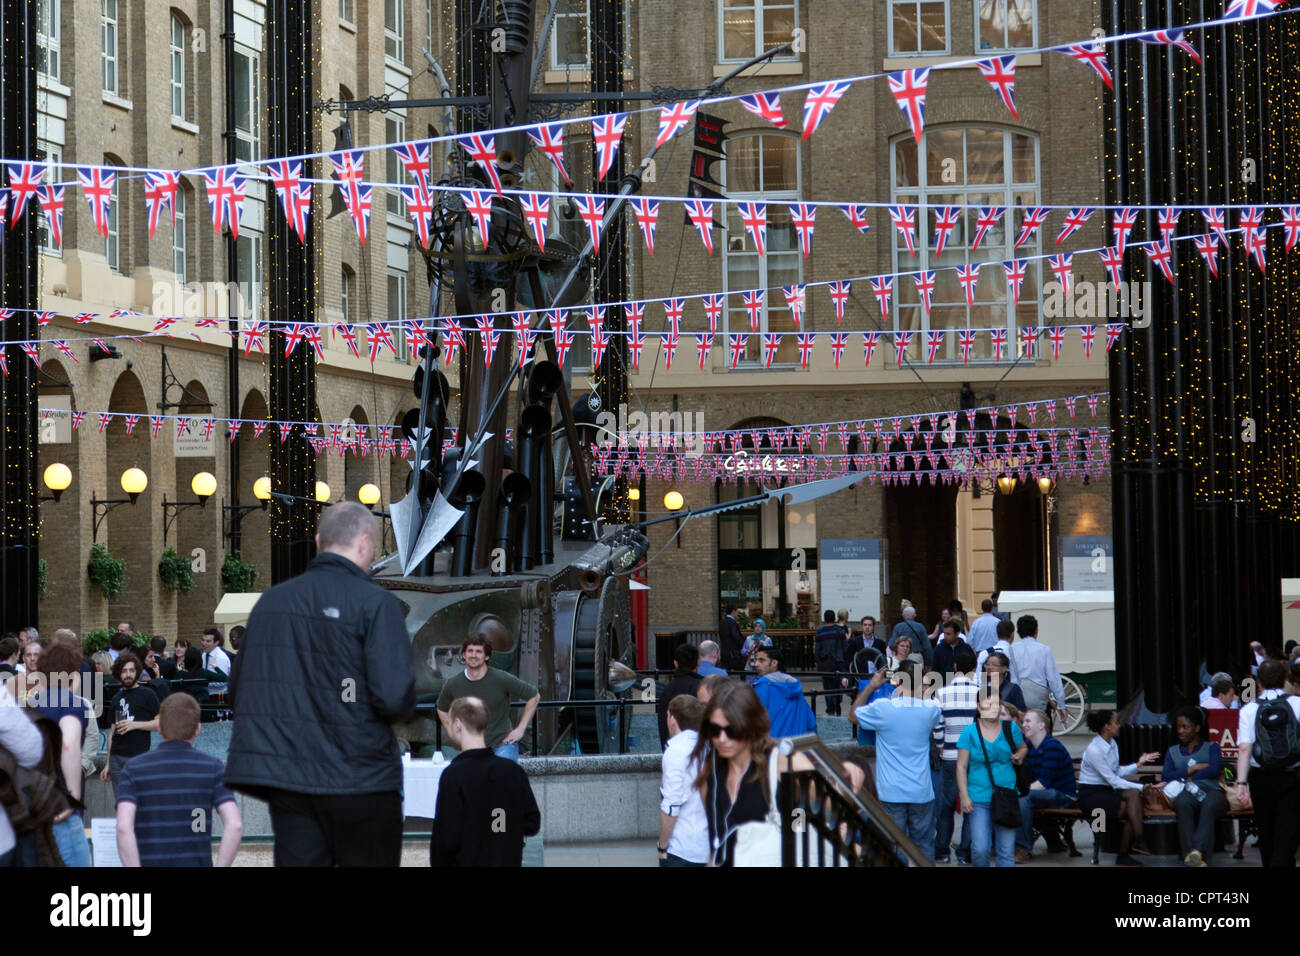 Union Jack bunting in Hay's Galleria on the Jubilee Walk, Southwark situated on the south bank of the River Thames Stock Photo